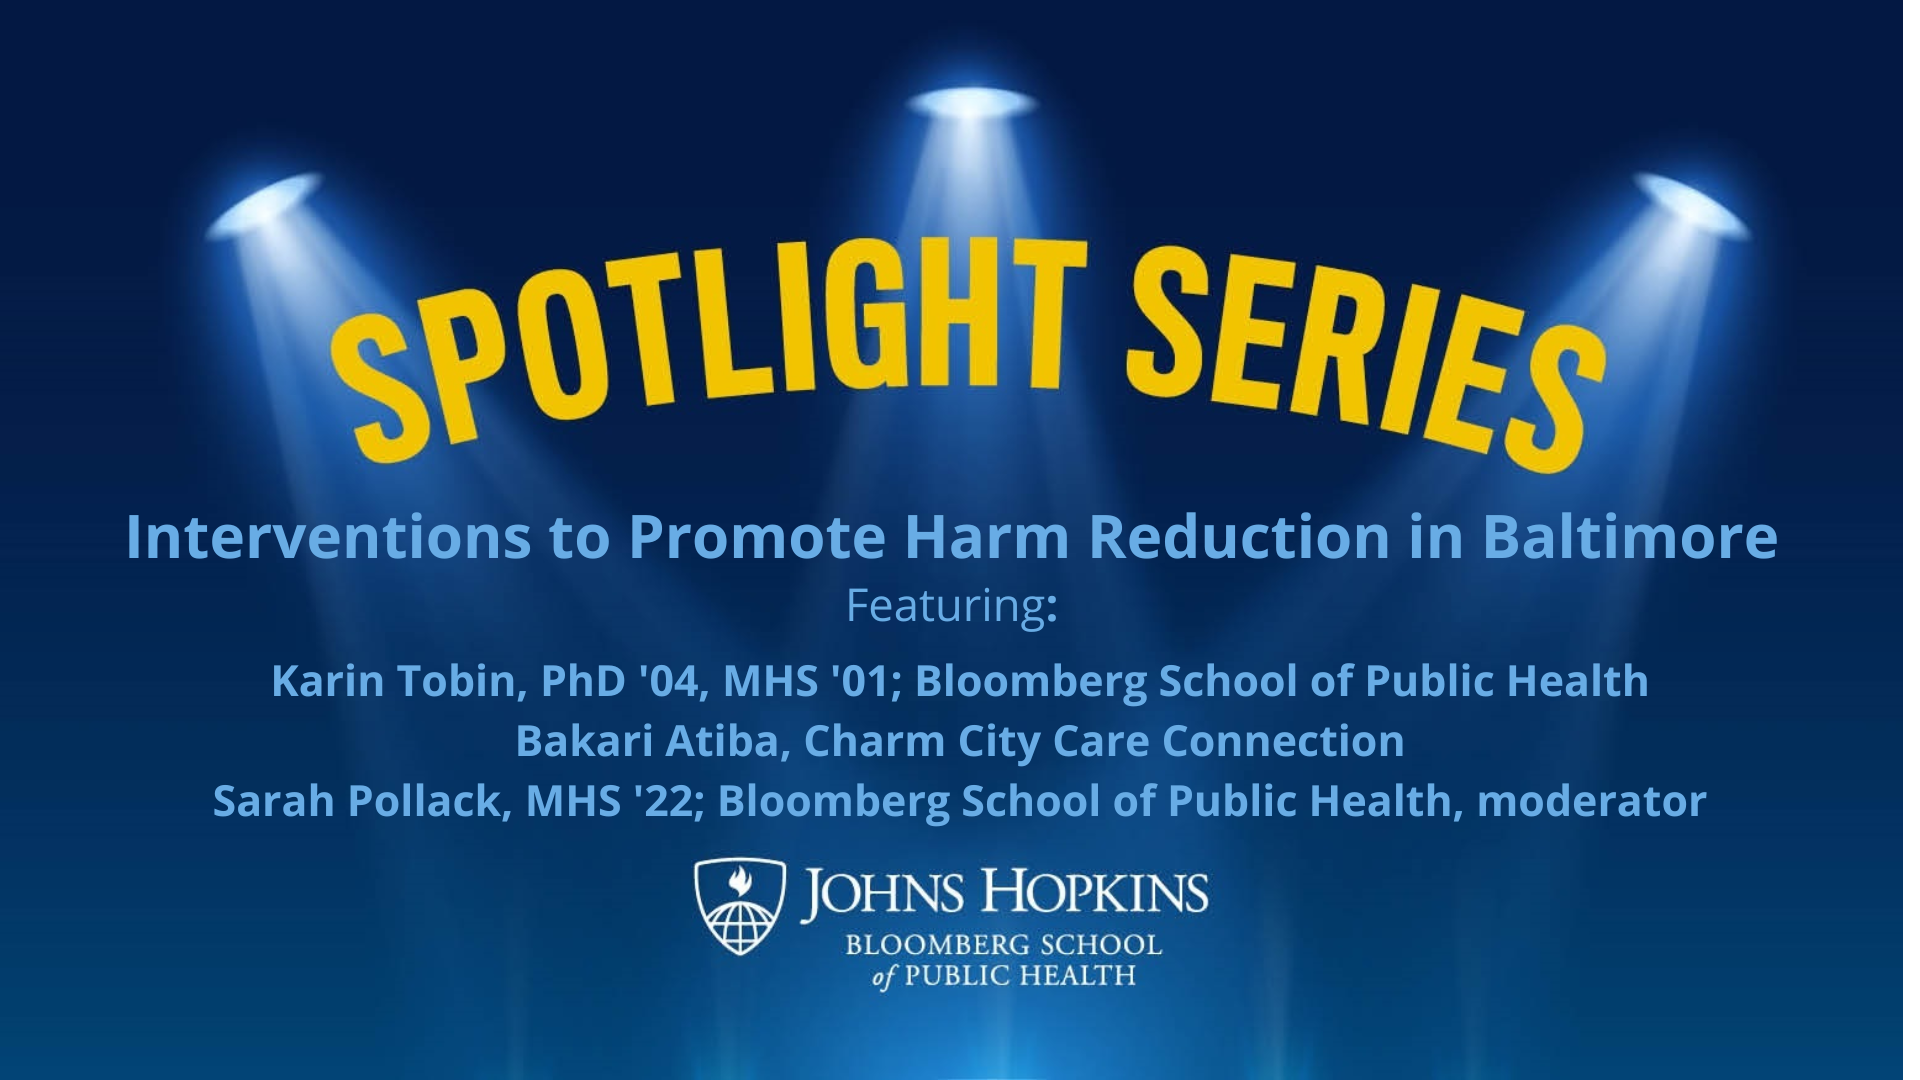 Interventions to Promote Harm Reduction in Baltimore